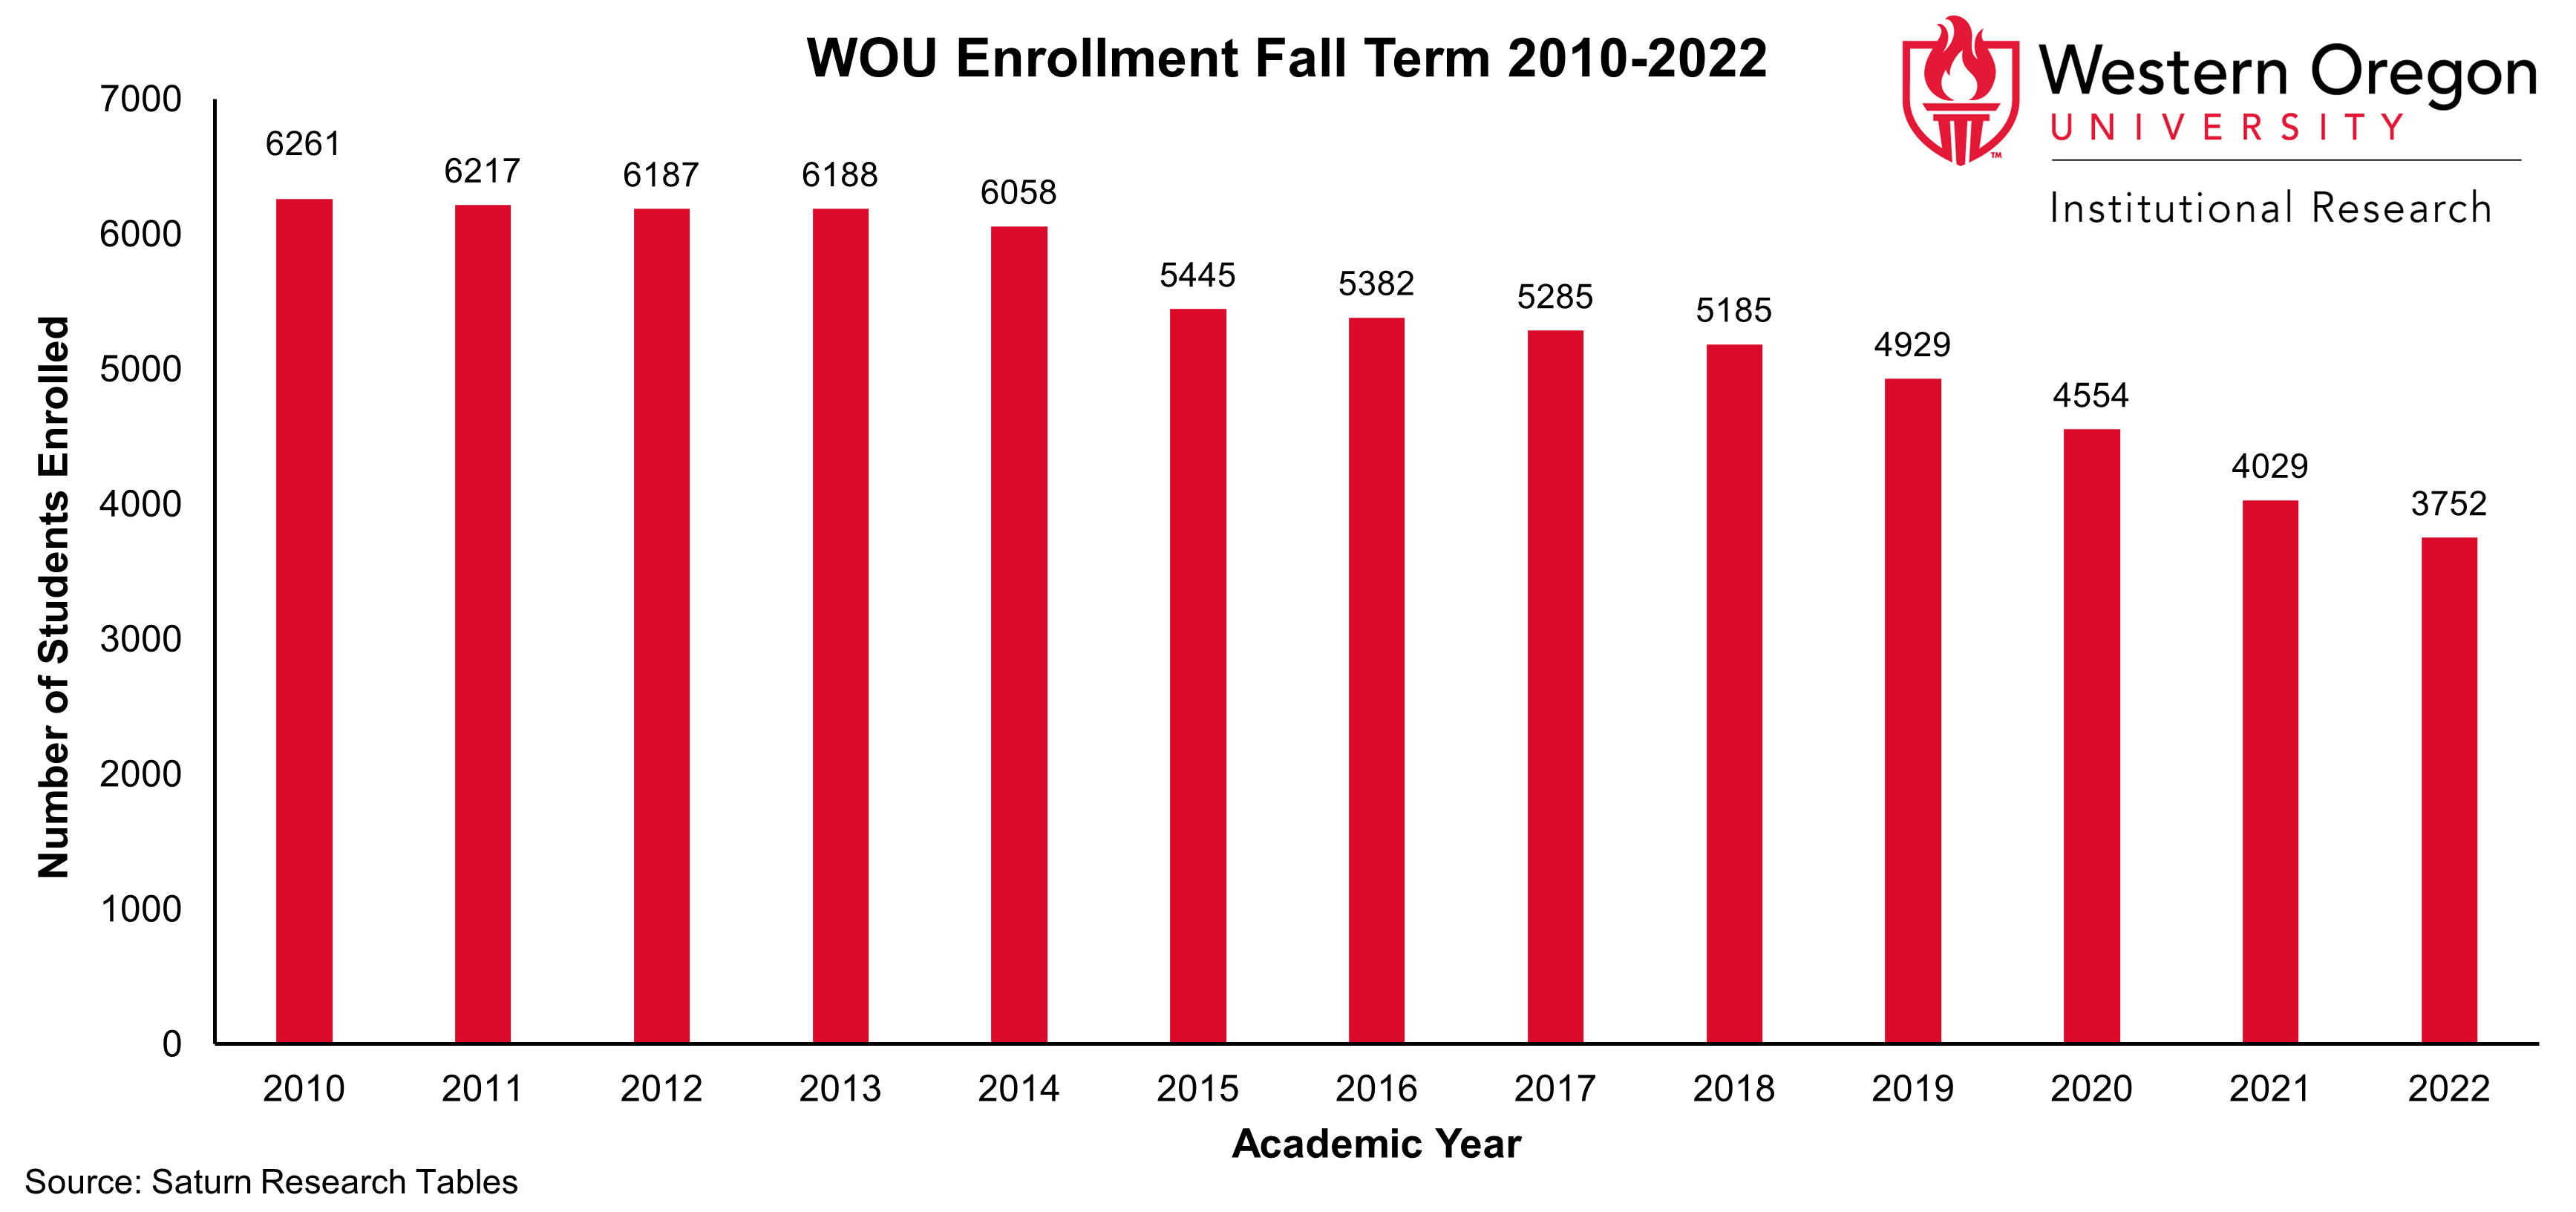 Bar graph of Fall enrollment counts since Fall 2010 for WOU students, showing that enrollment has been steadily declining since Fall 2010